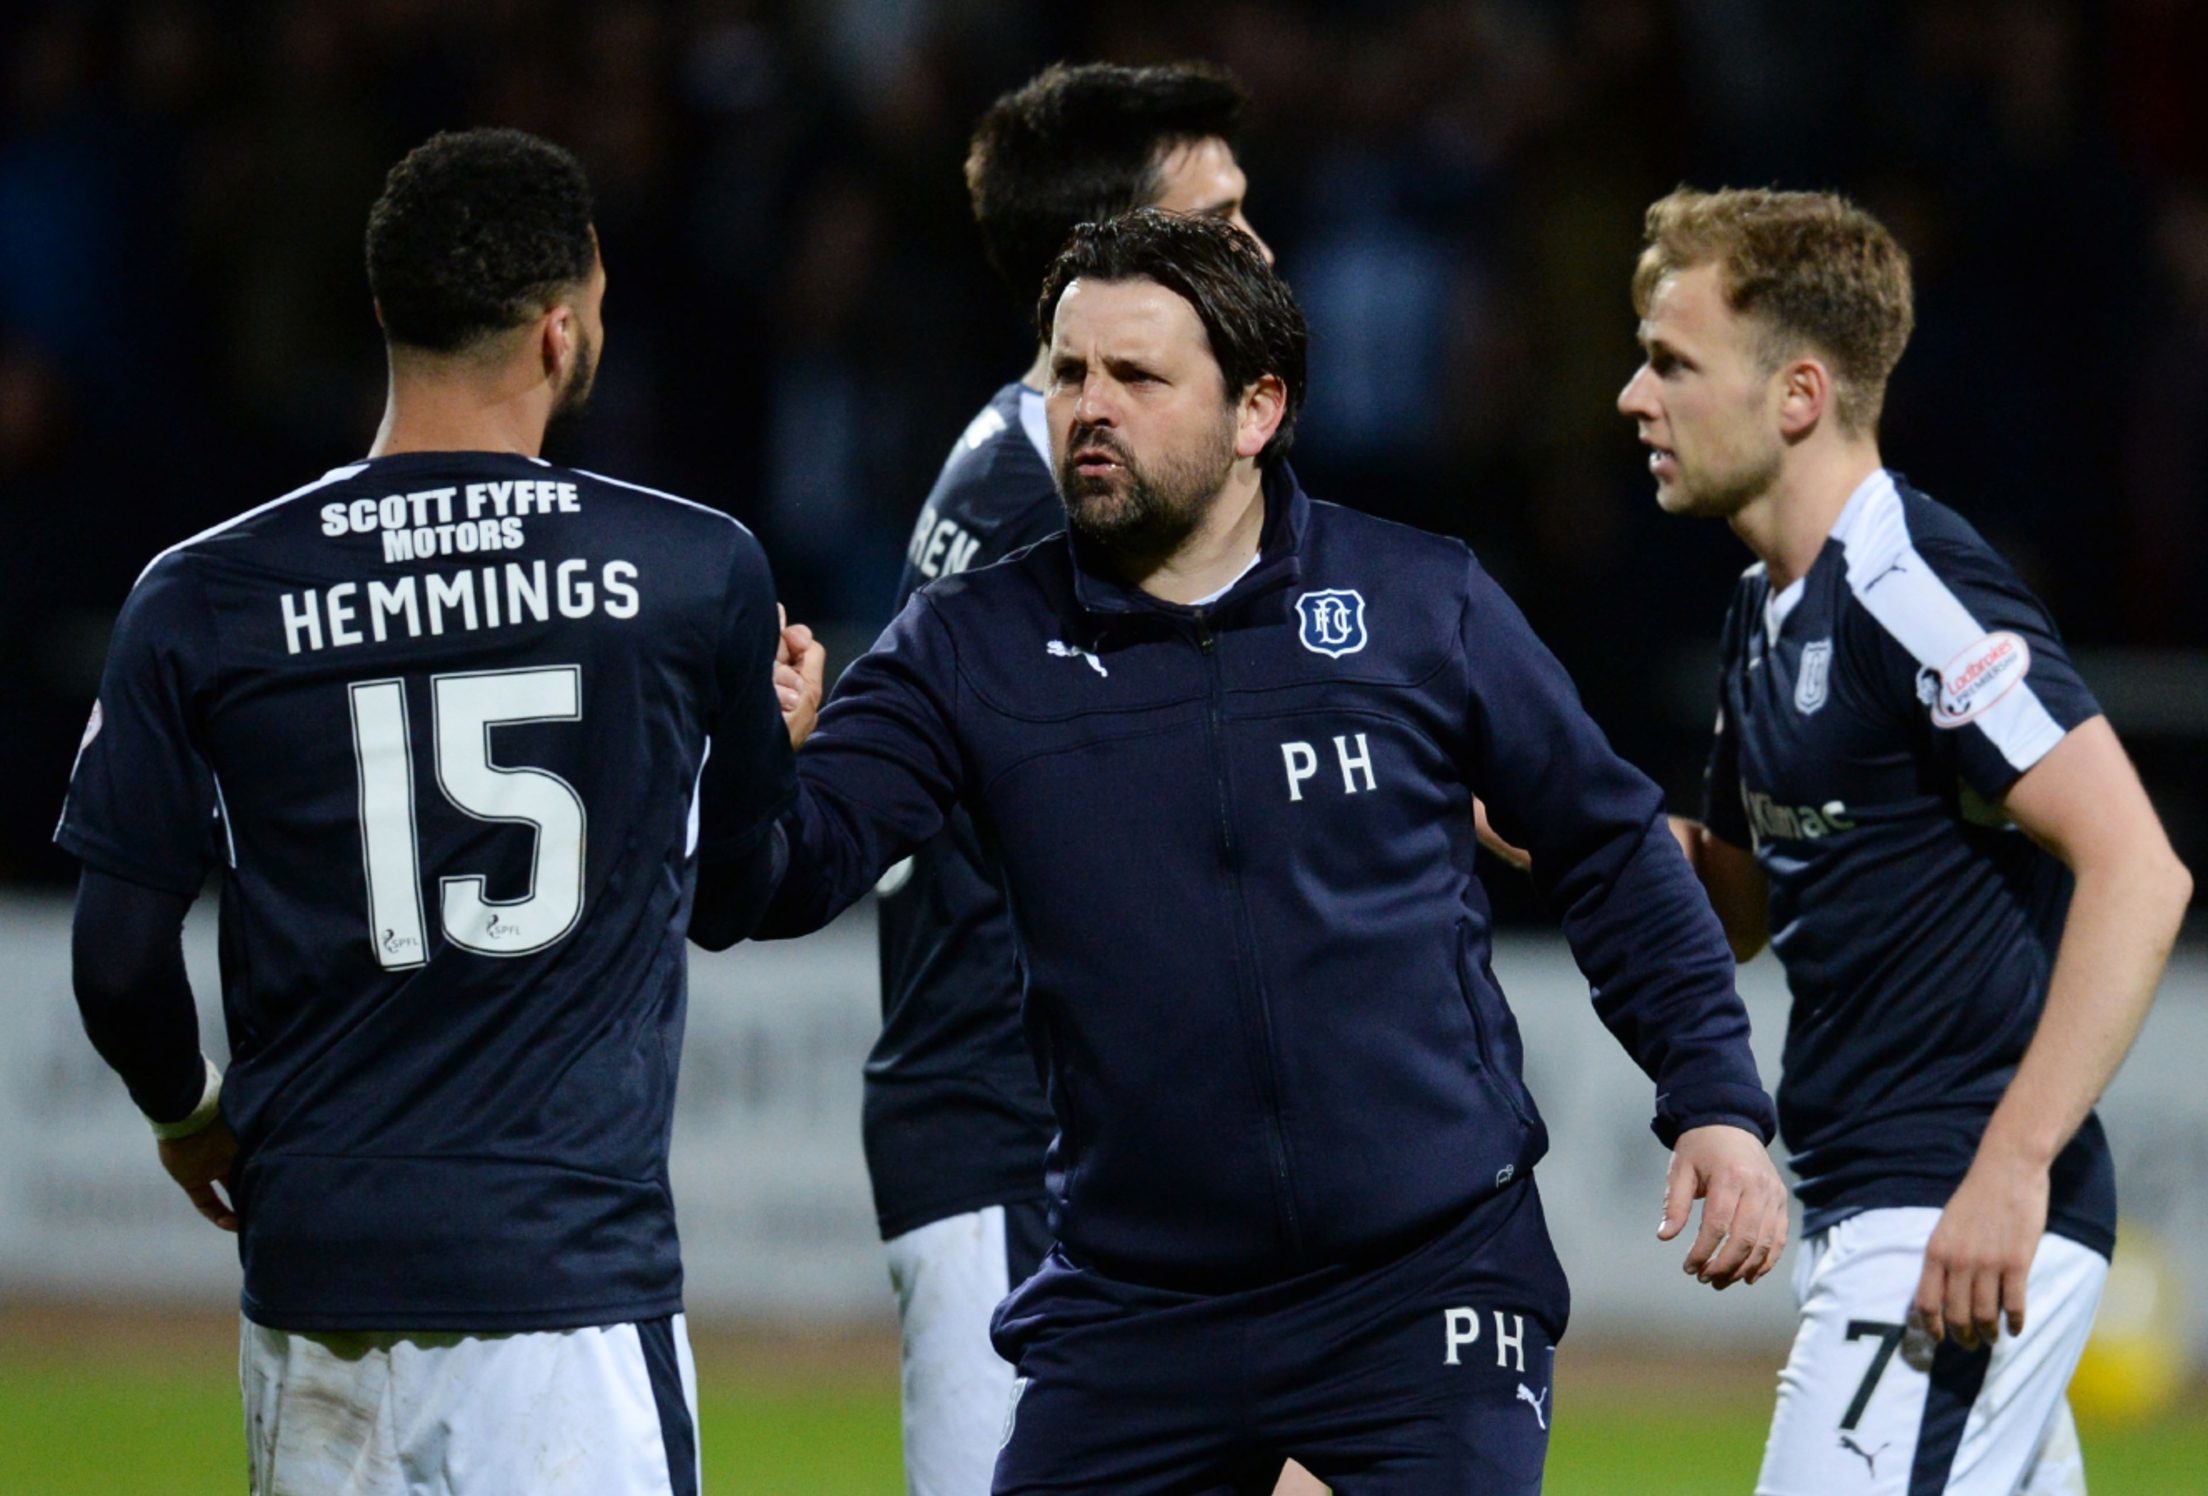 Dundee were celebrating after the last derby.